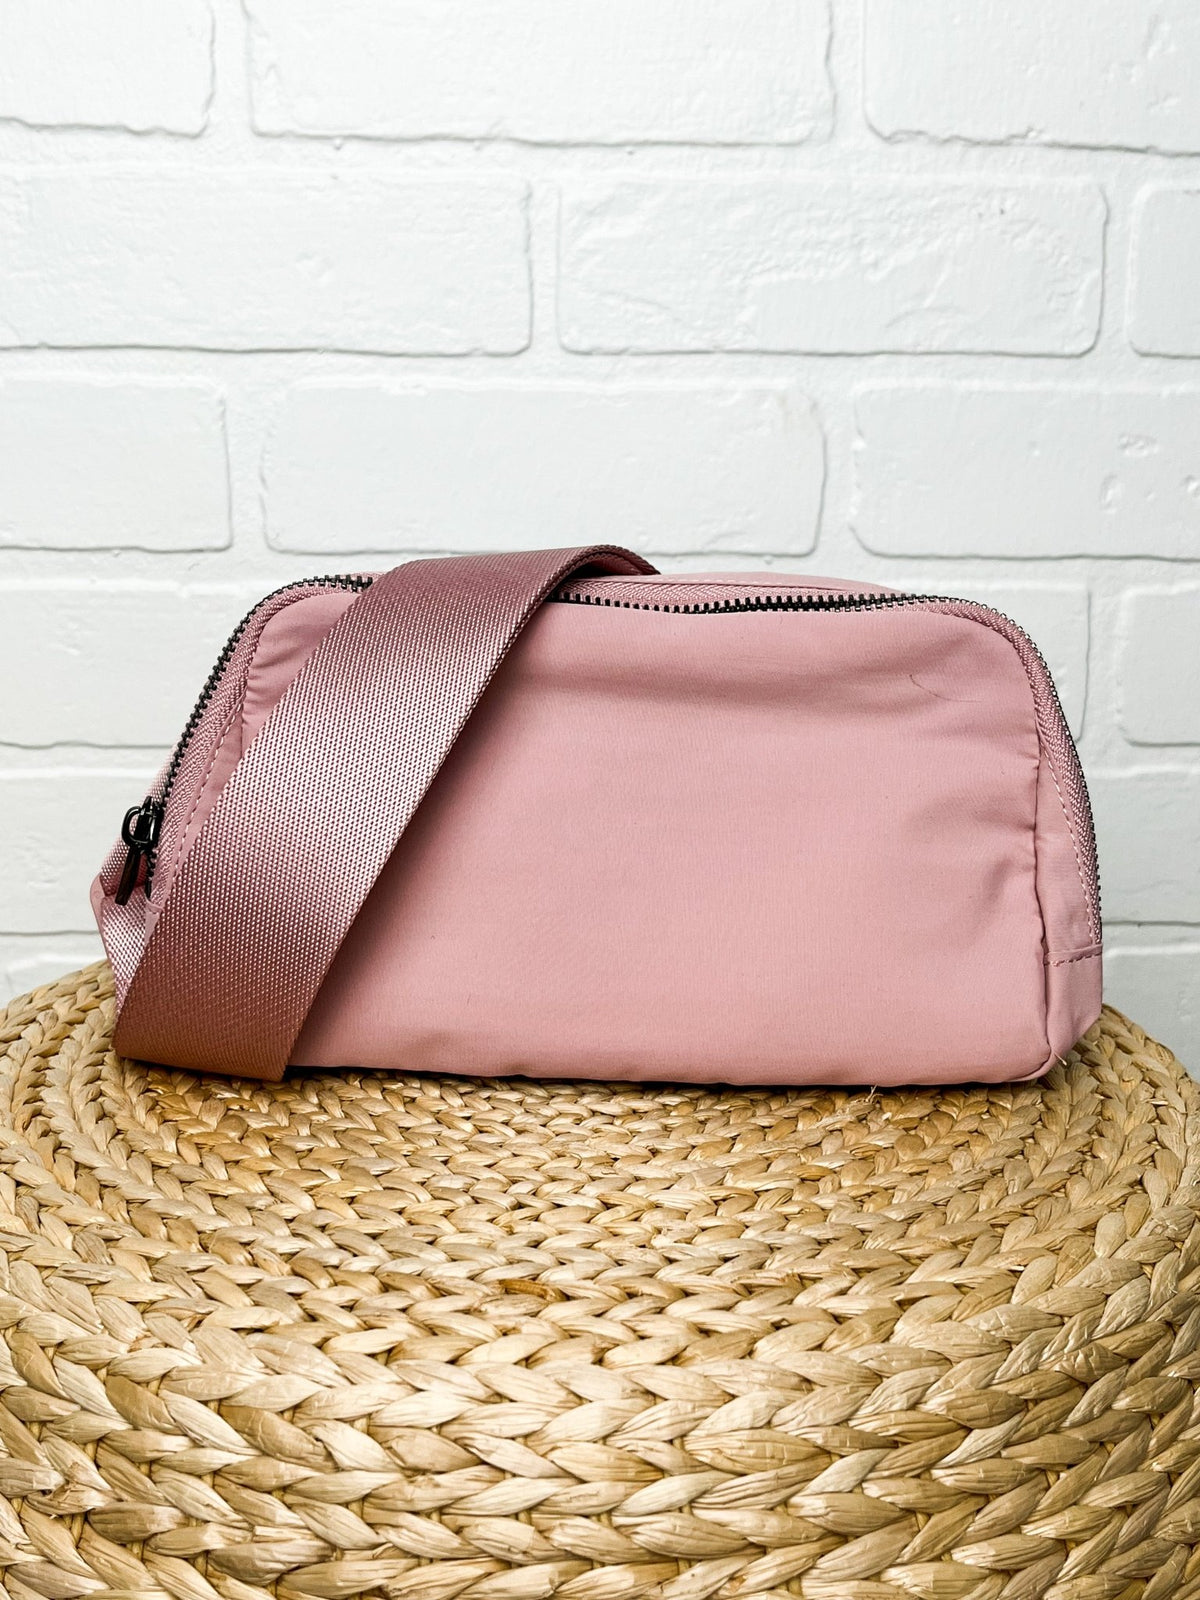 Sling belt bag blush - Trendy Bags at Lush Fashion Lounge Boutique in Oklahoma City